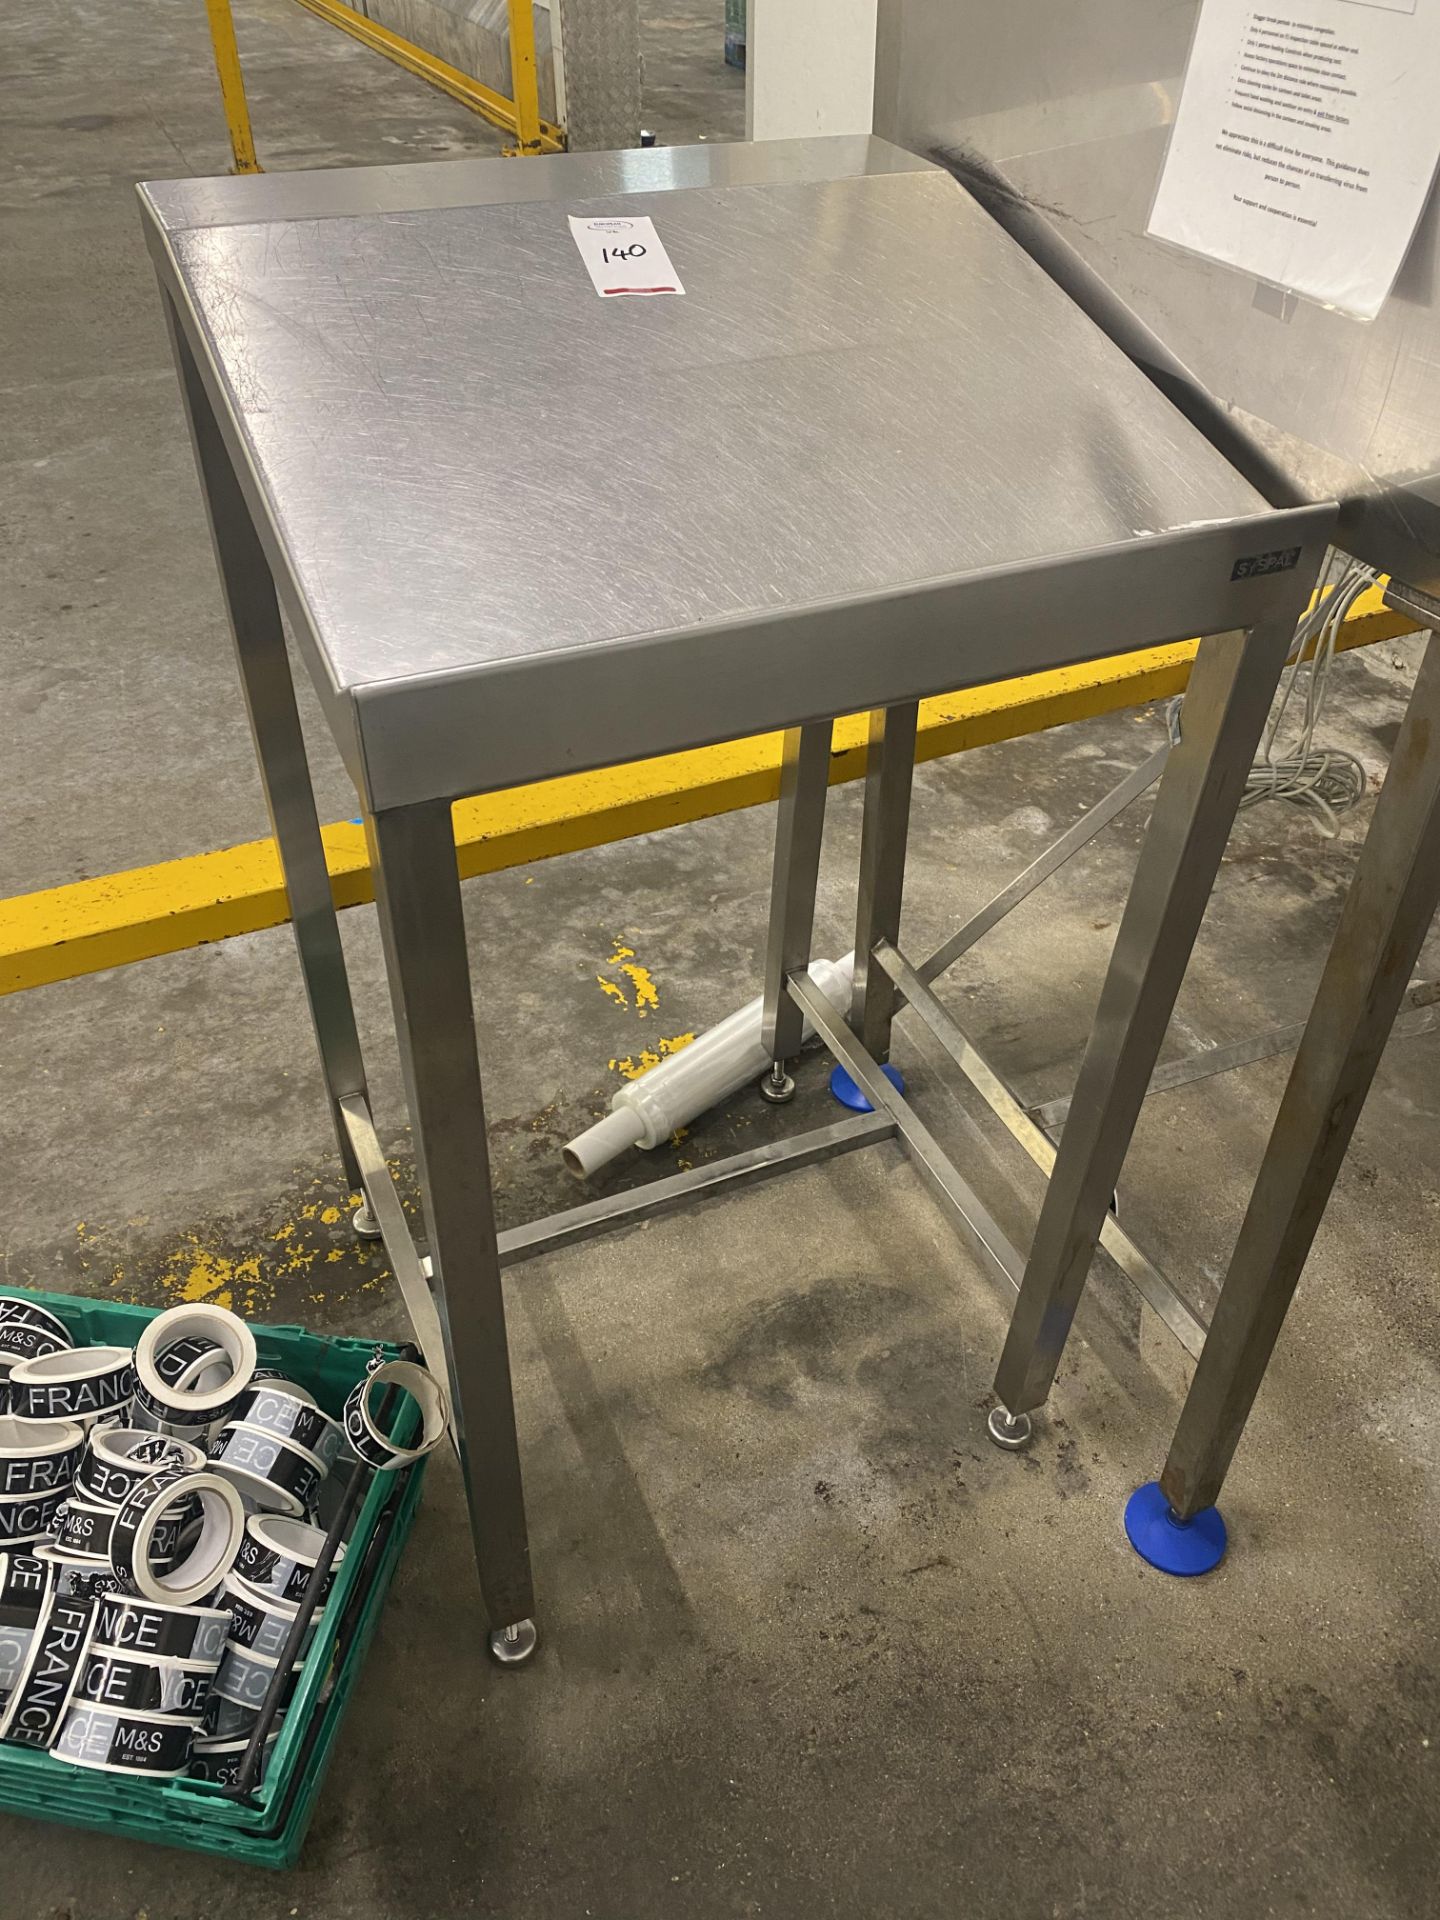 Stainless steel work station with stainless steel lecturn and Fermoo stainless steel shelfing unit - Image 3 of 4